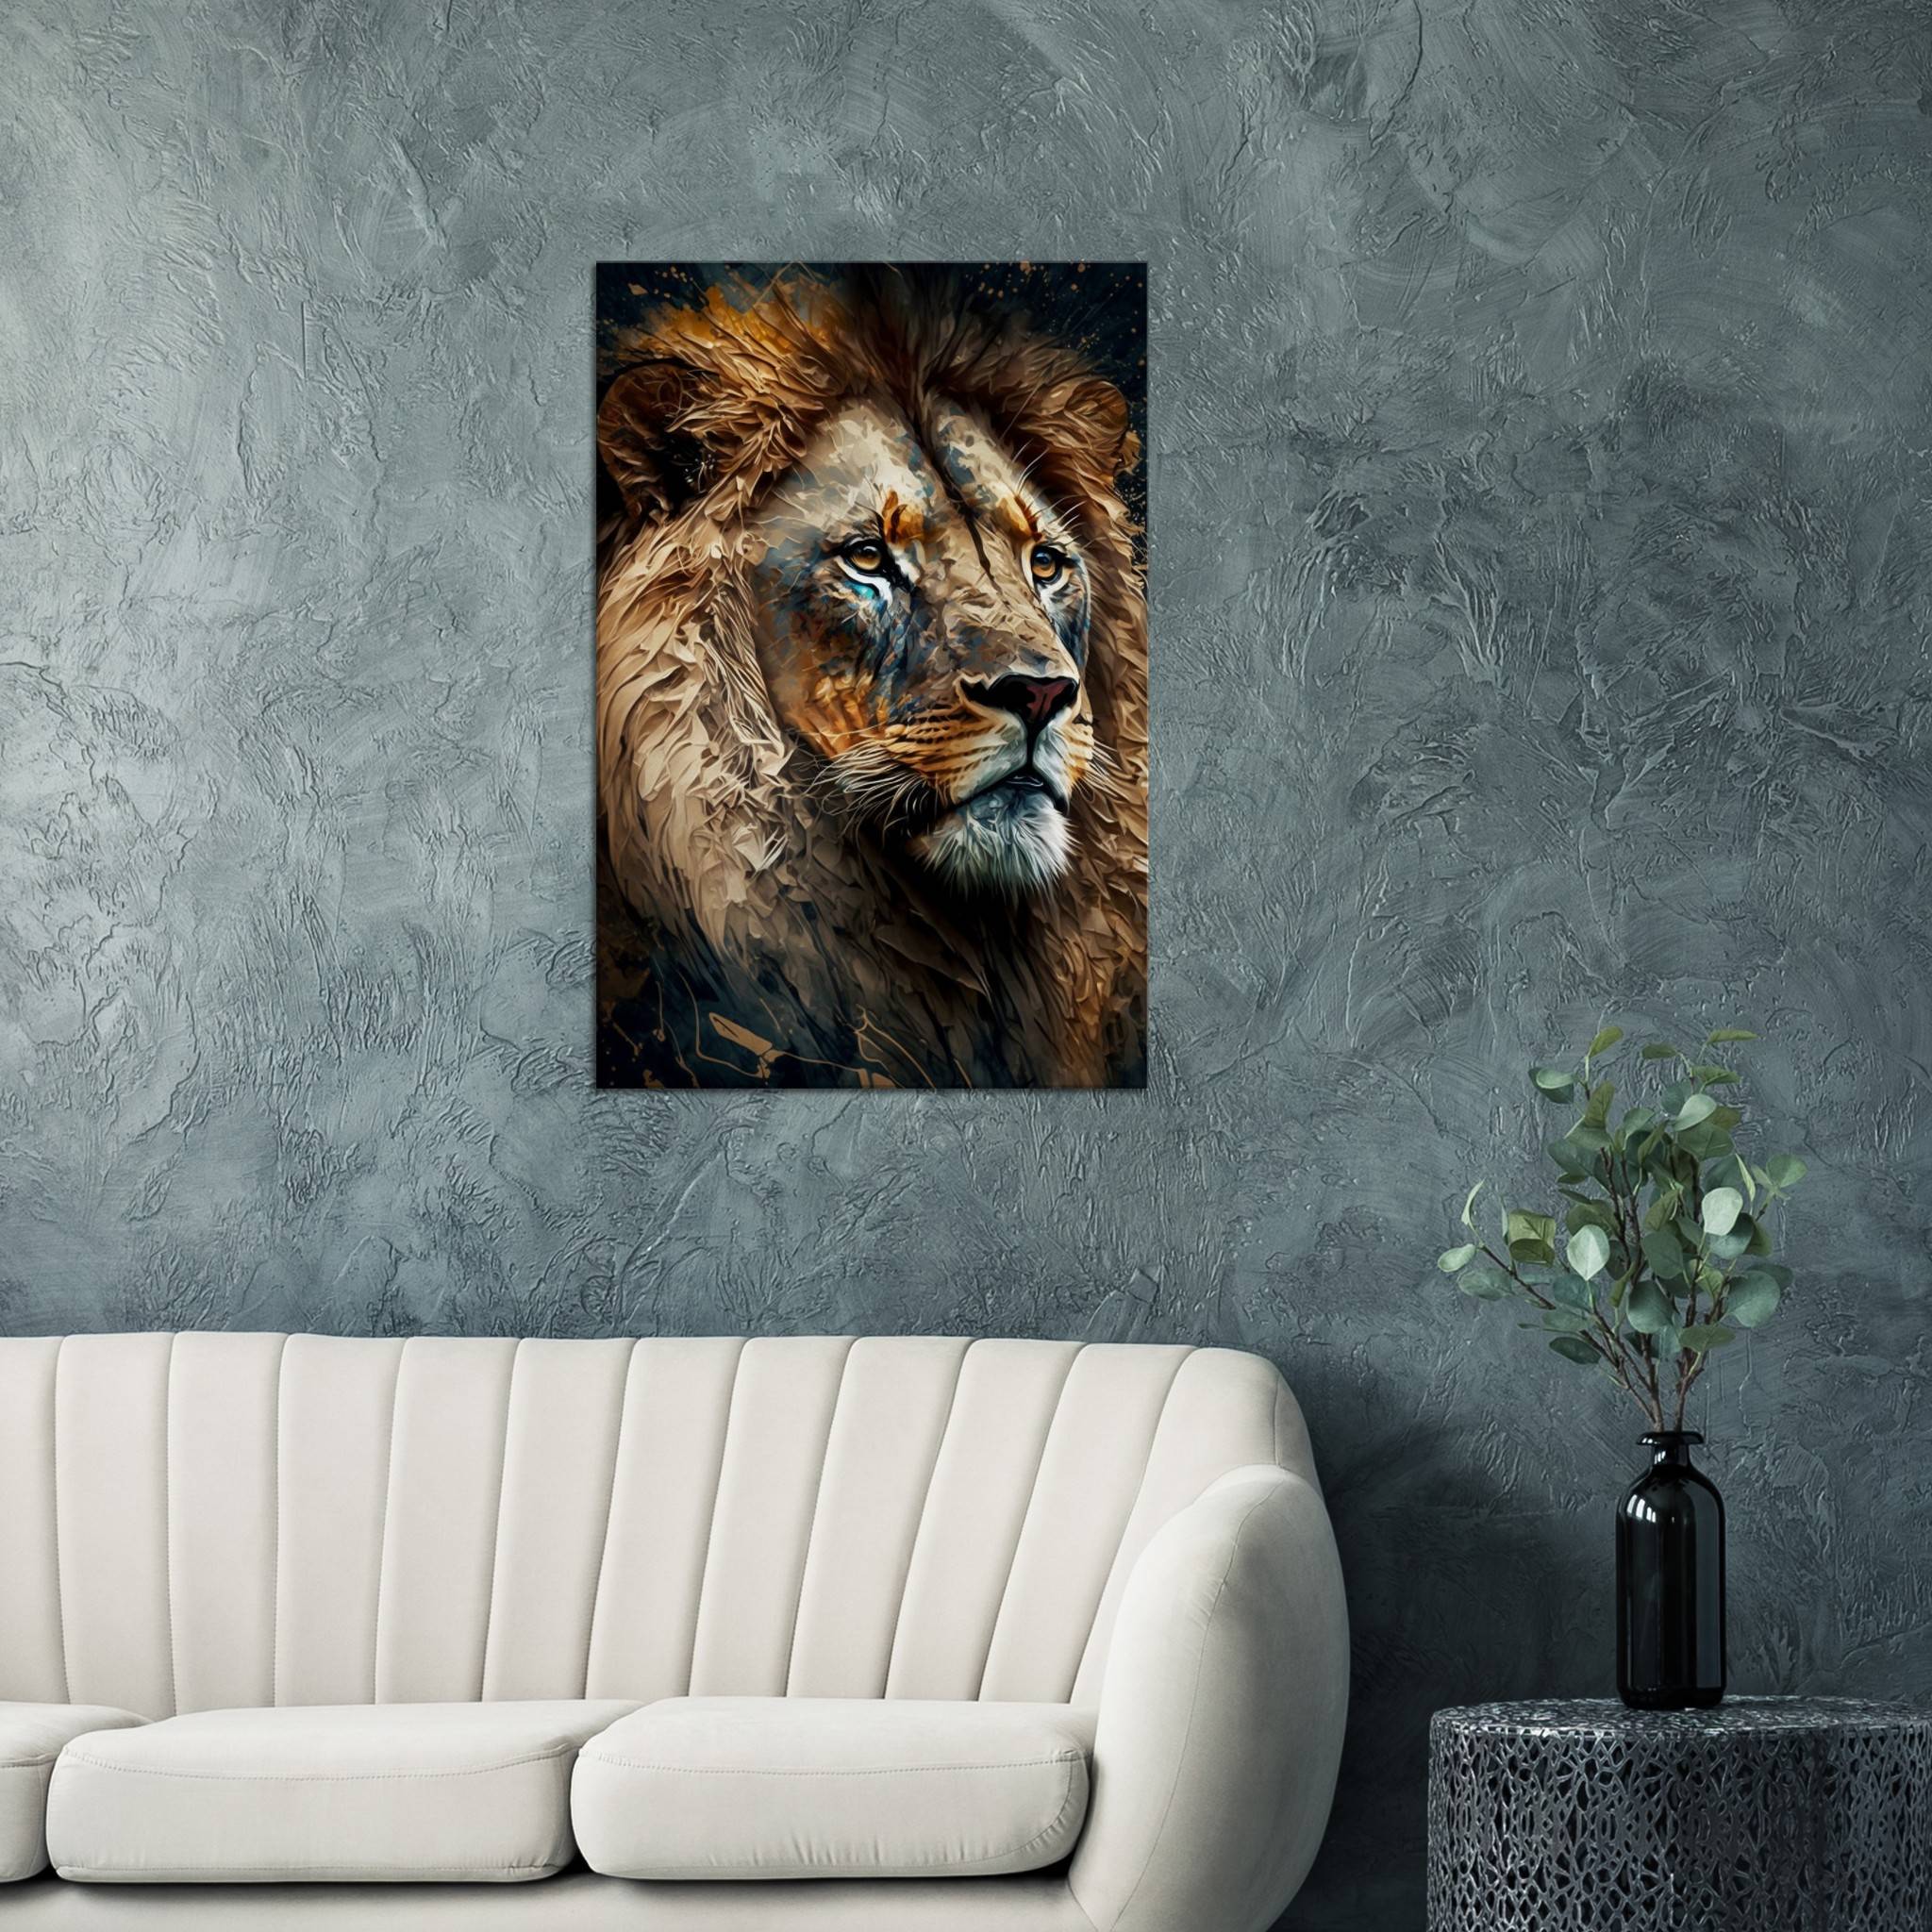 Lion Close to Reality 8 50 x 75 cm (Canvas Print) Canvas reproduction The Pianist Print On Demand Fabled Gallery https://fabledgallery.art/product/lion-close-to-reality-8-50-x-75-cm-canvas-print/